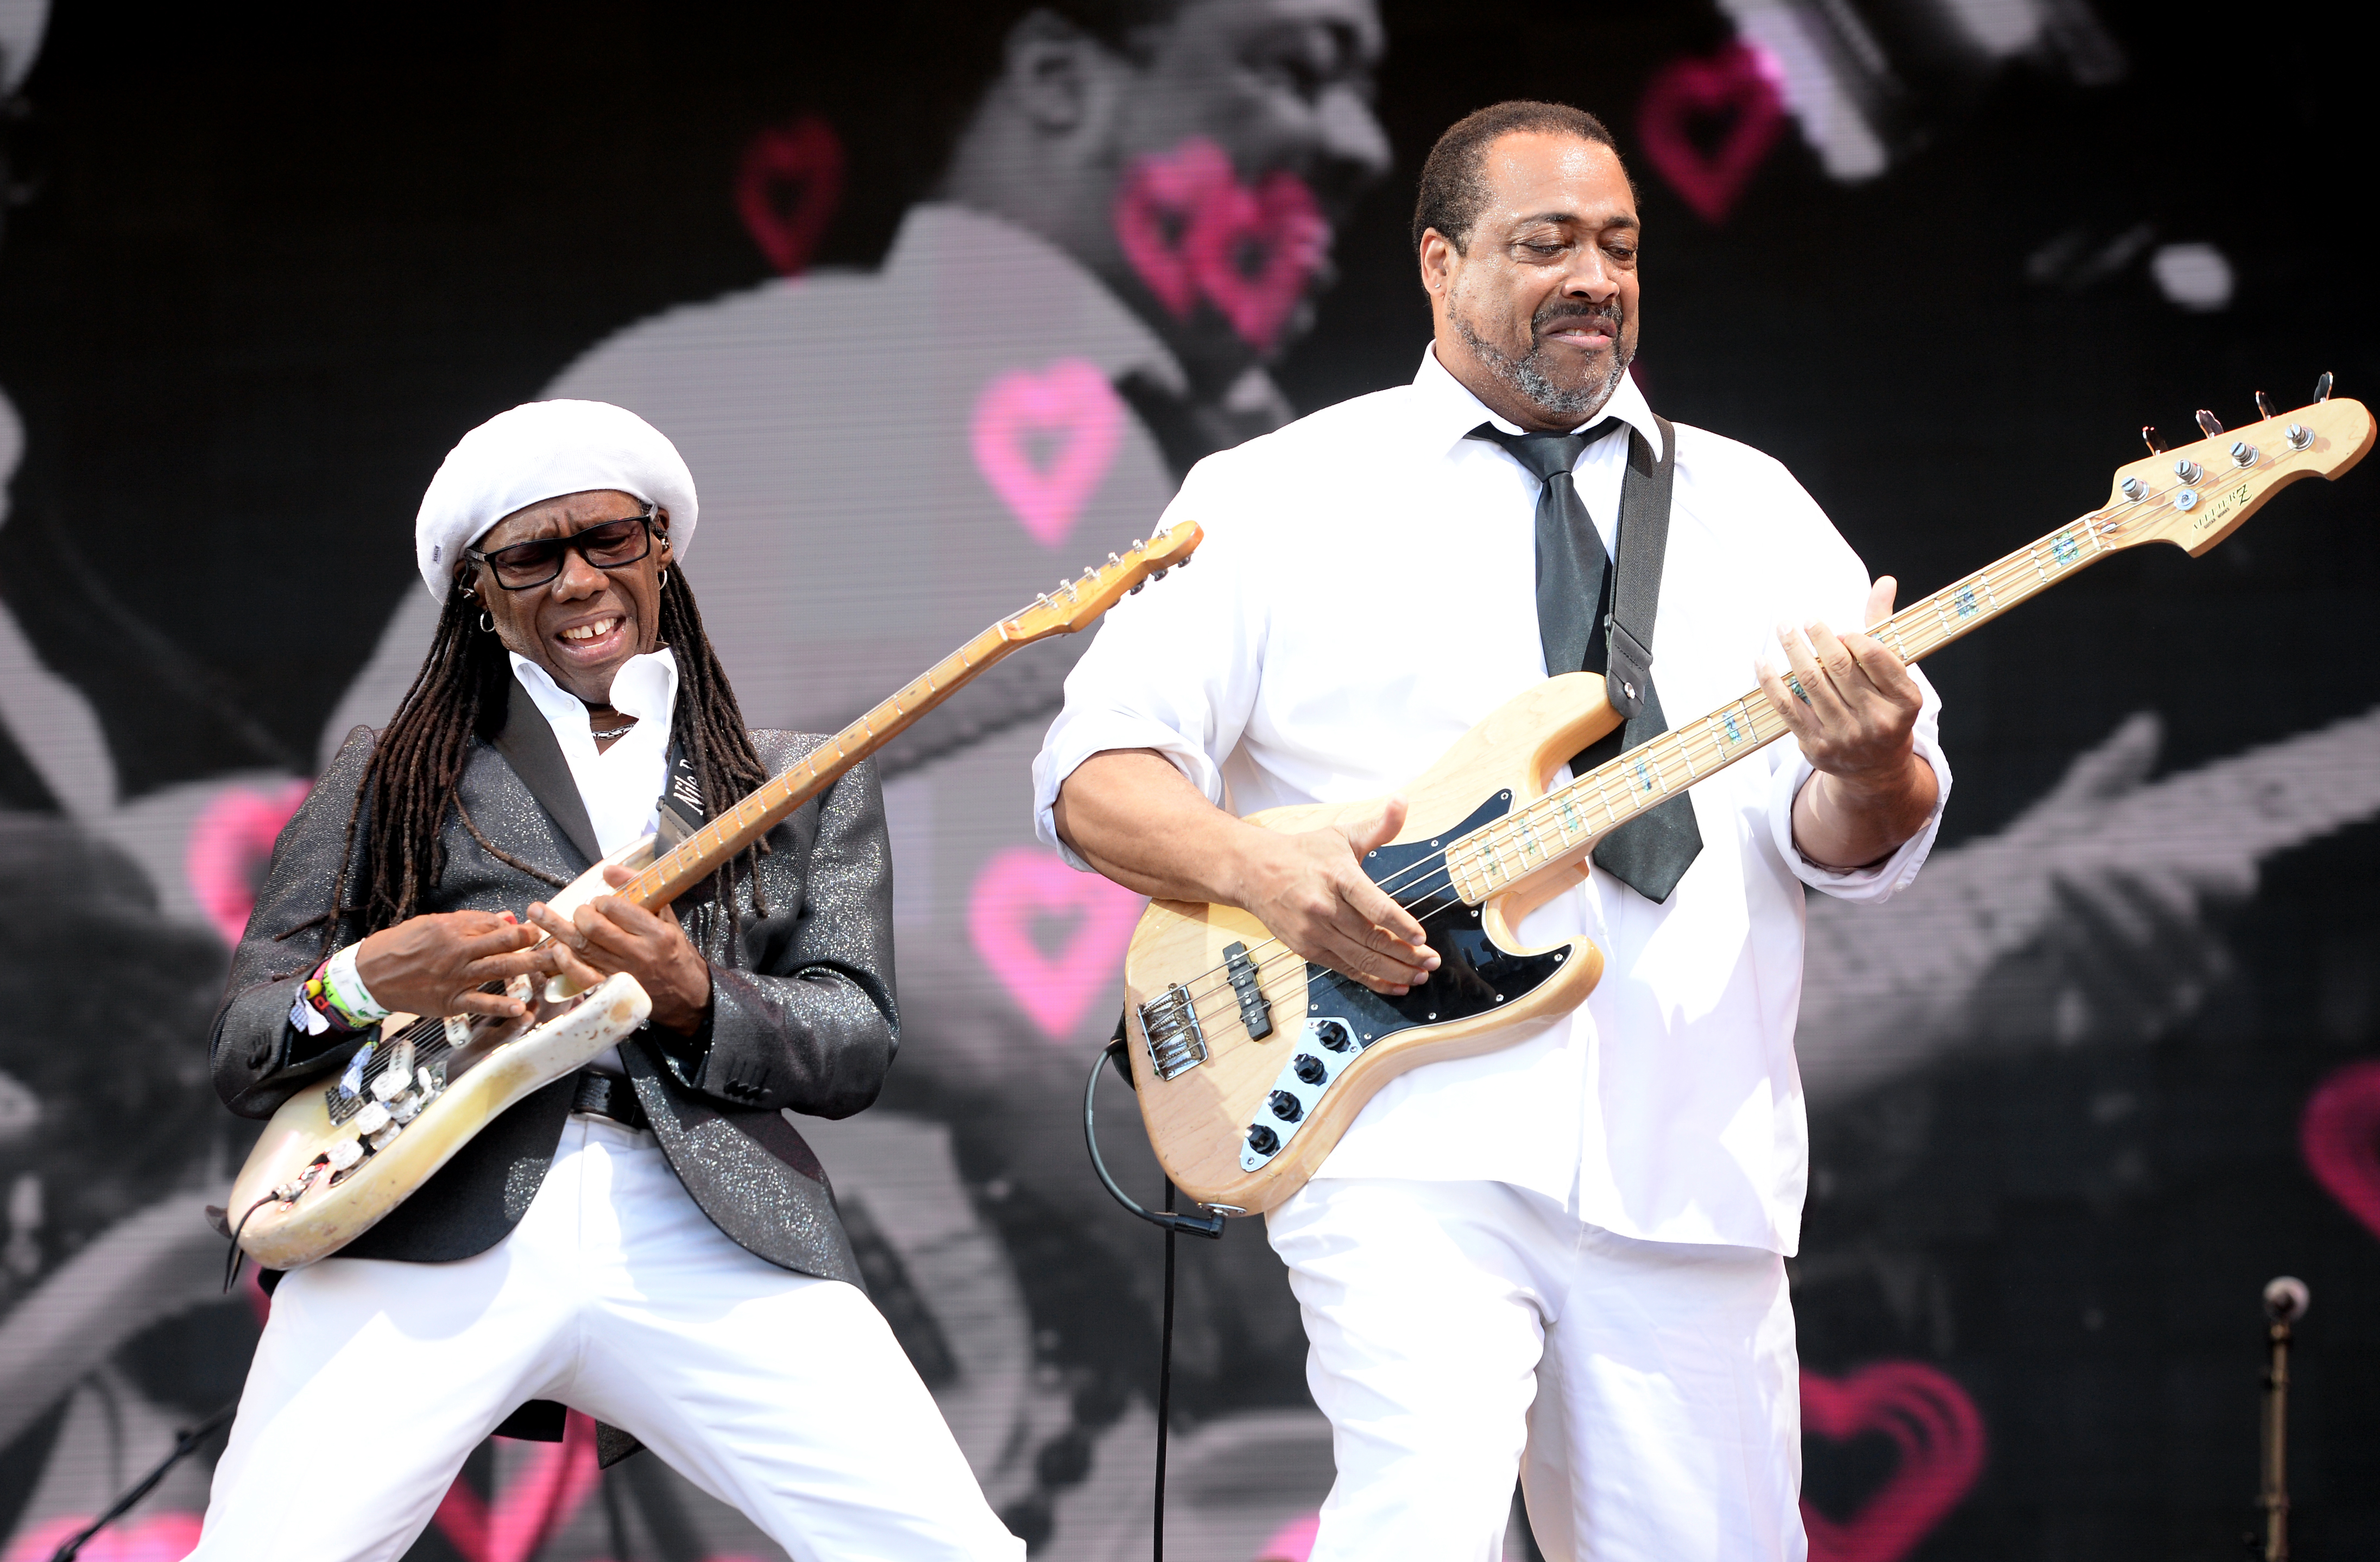 Nile Rodgers and Chic at Glastonbury